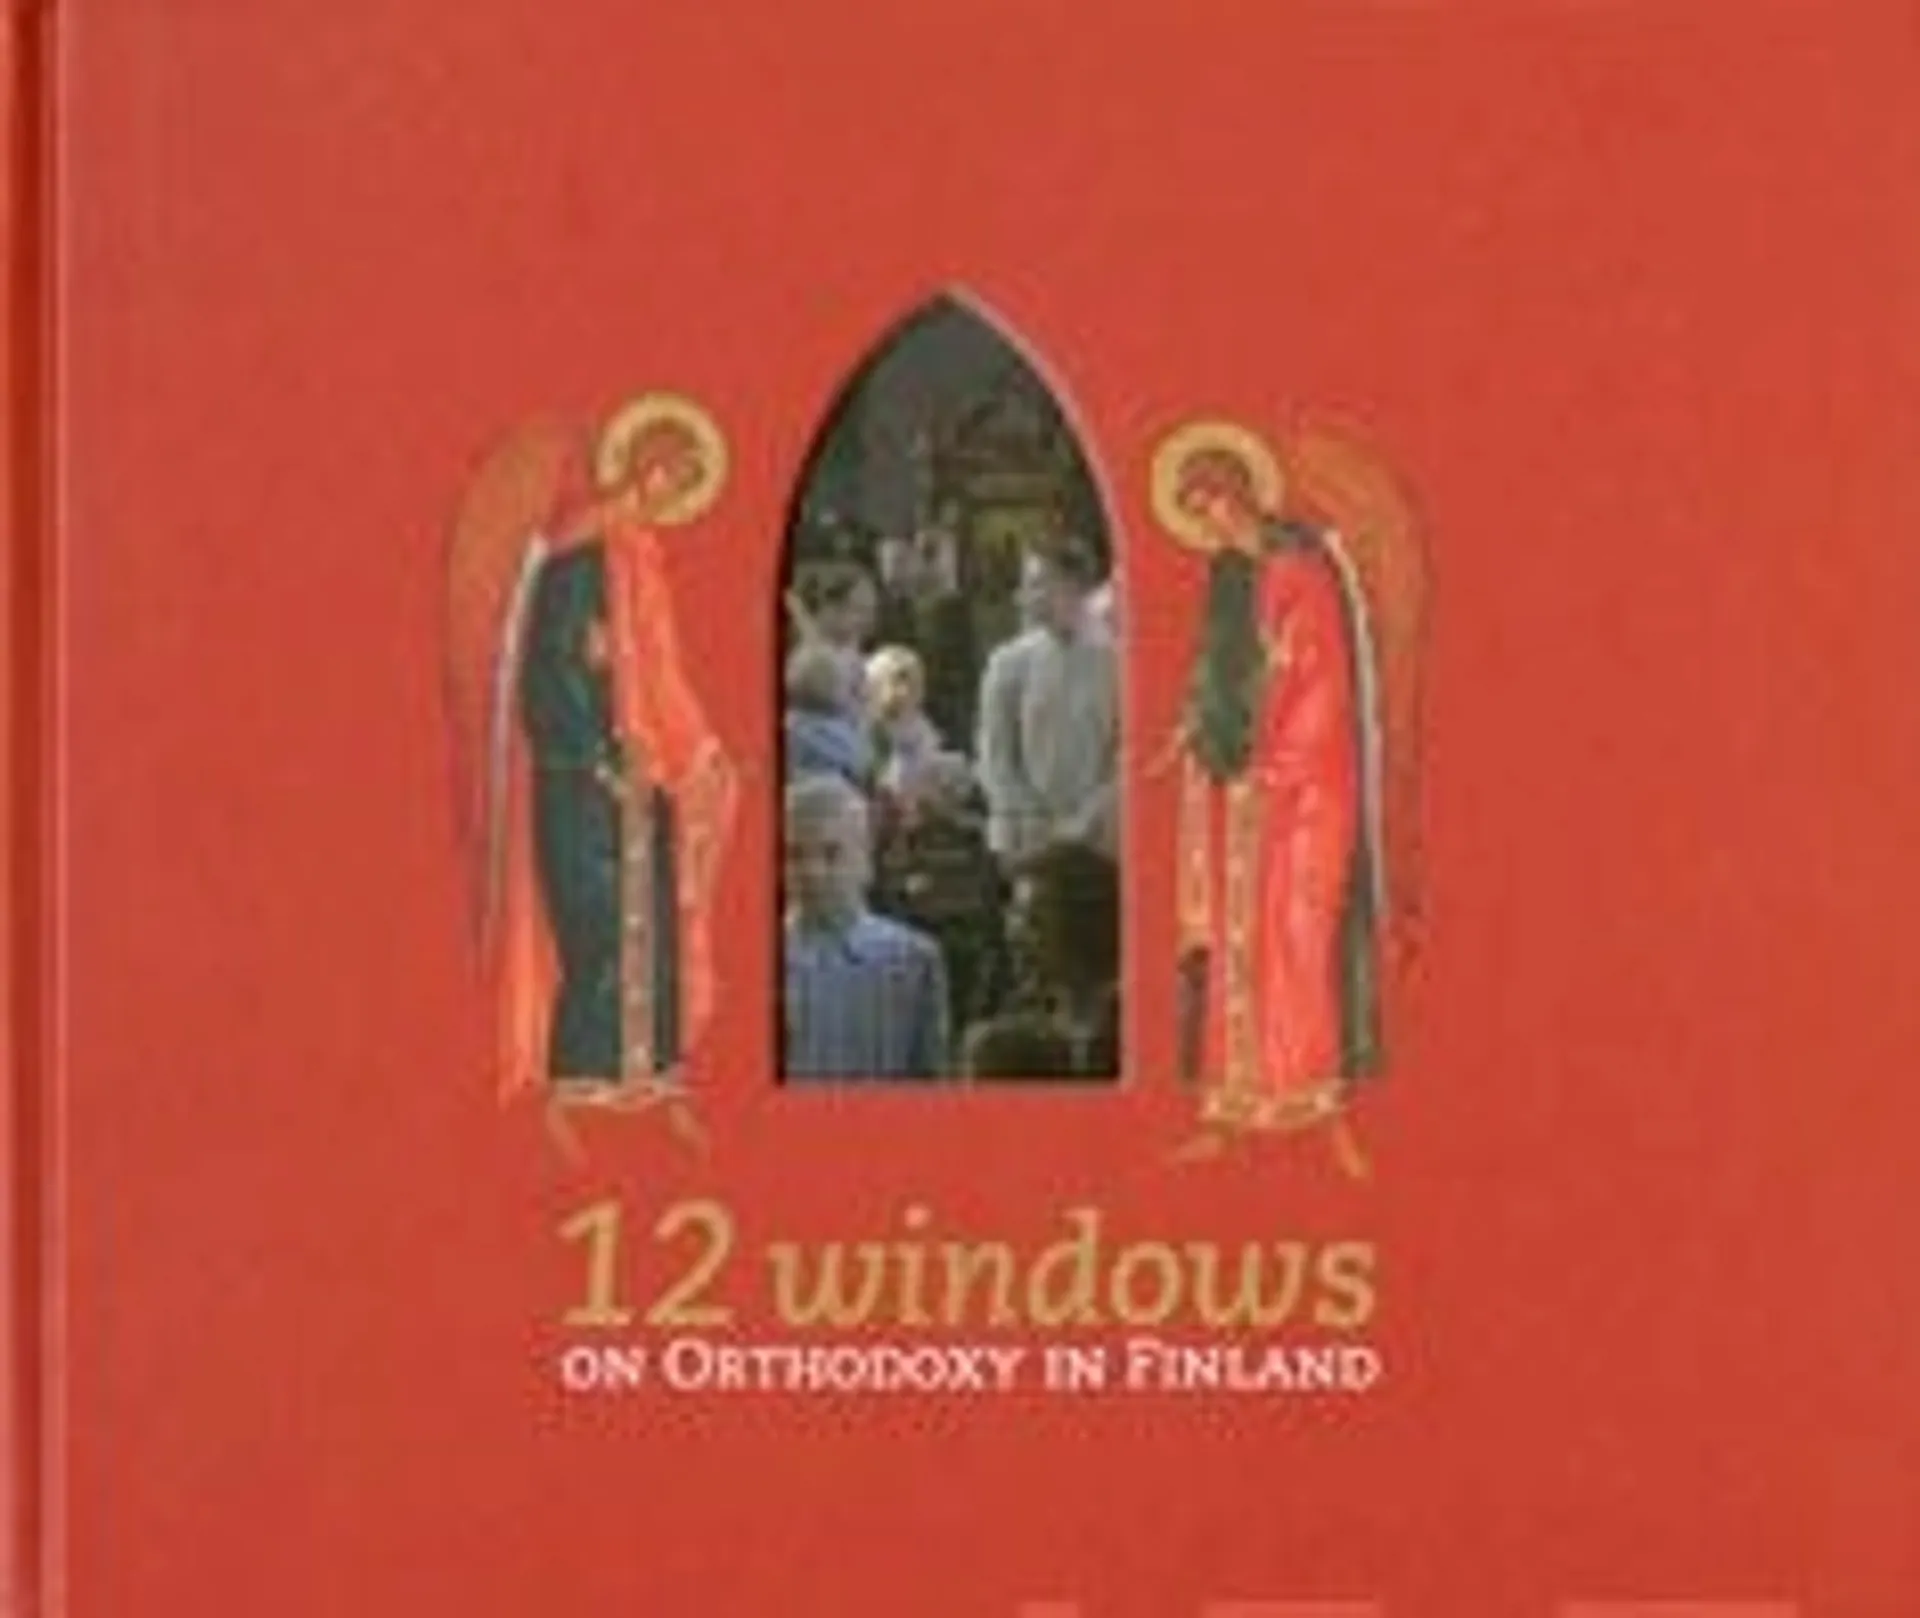 12 windows on Orthodoxy in Finland